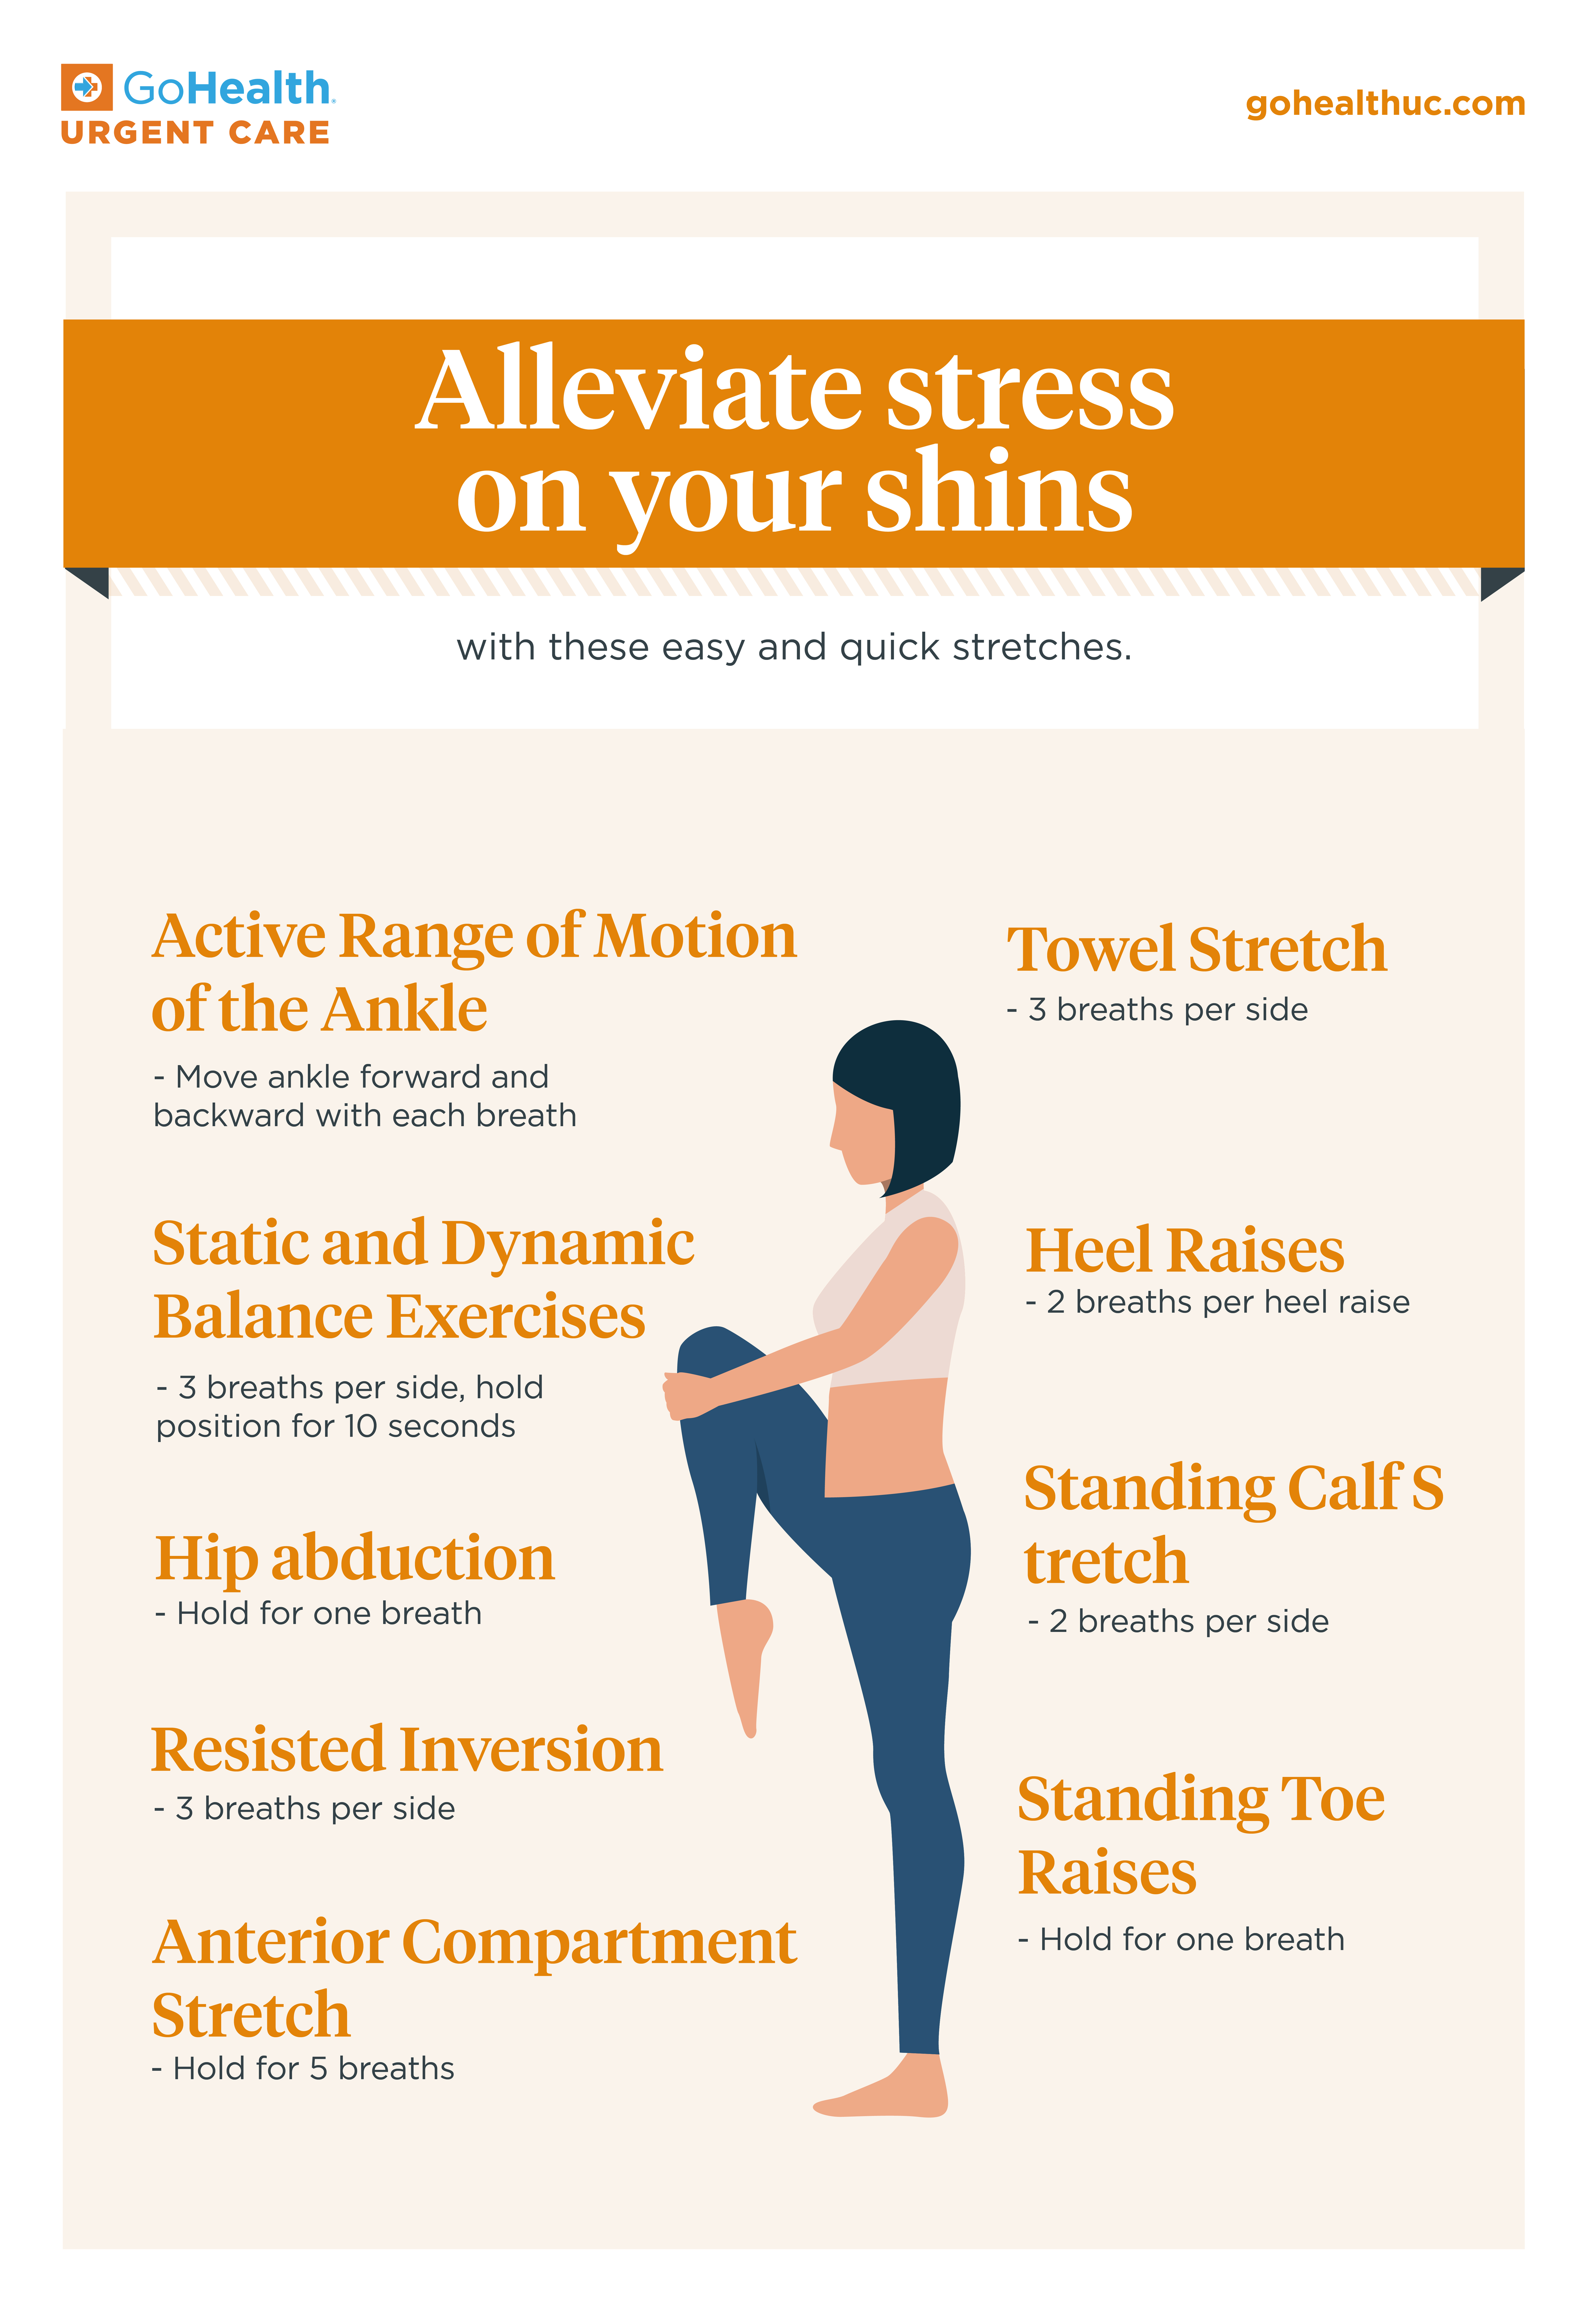 Shin Splint stretches for prevention and treatment | GoHealth